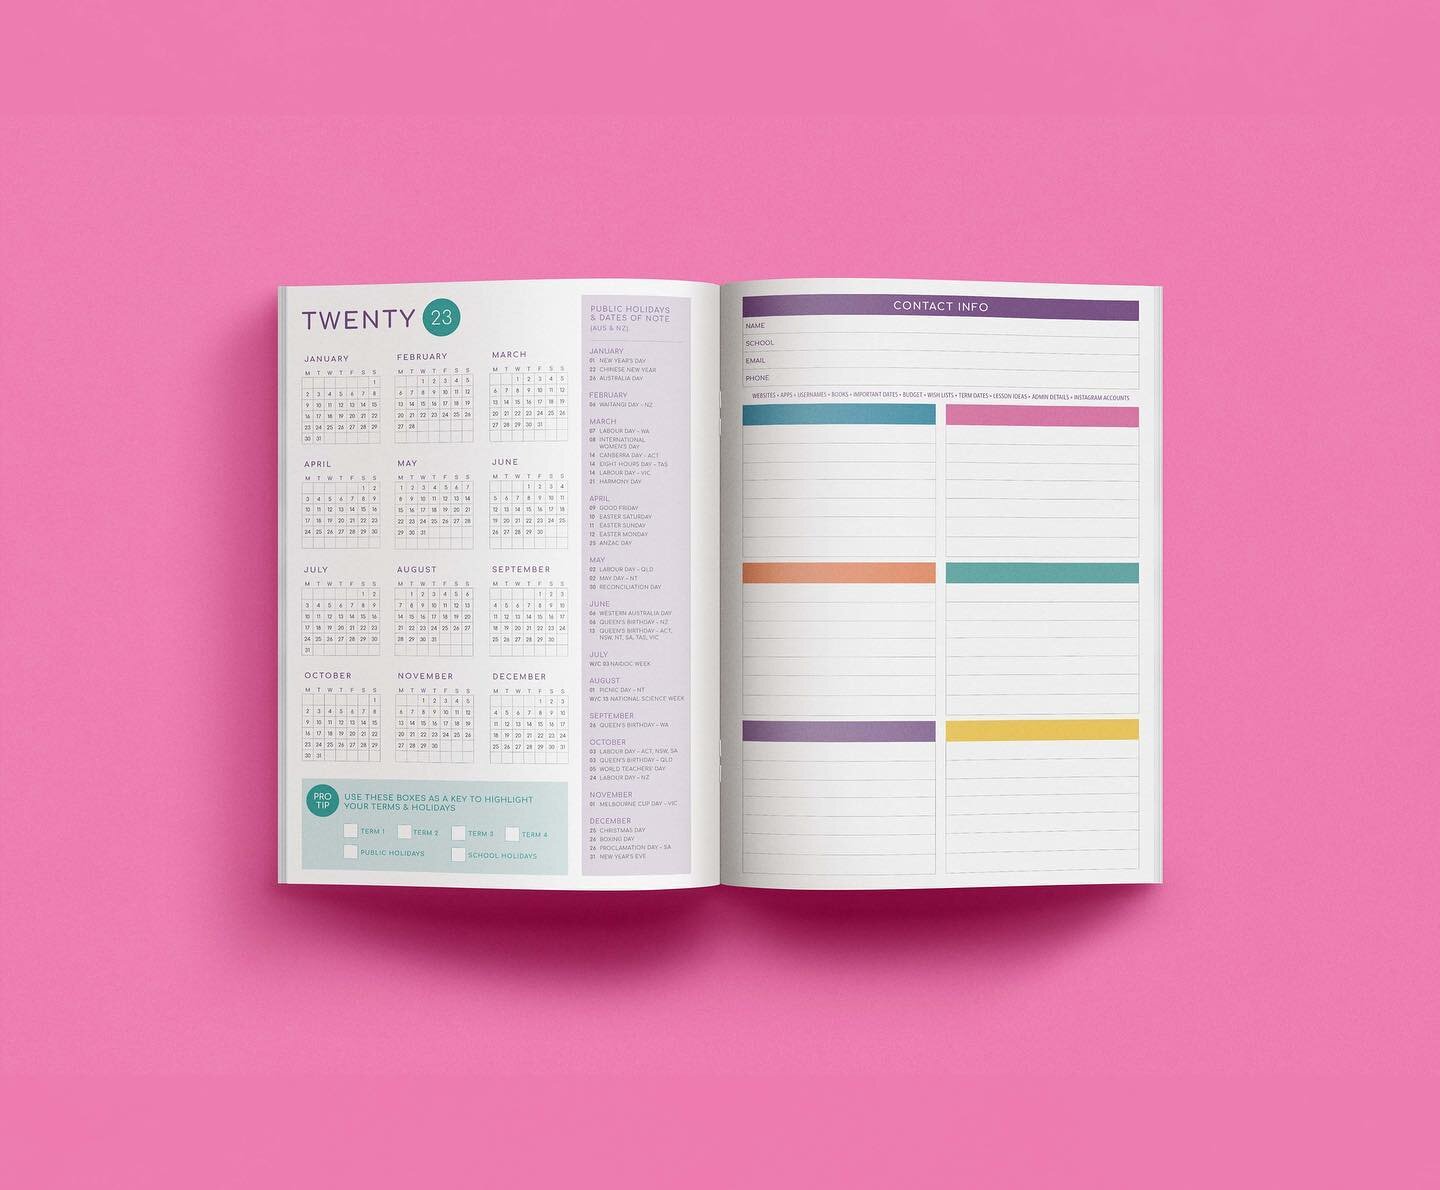 ✨As Victoria goes back to school in less than a week (phew), I thought it was fitting to share a design project I did mid last year with incredible brand @ziviadesigns, who creates beautiful teacher planners. Their mission is to &lsquo;provide teache